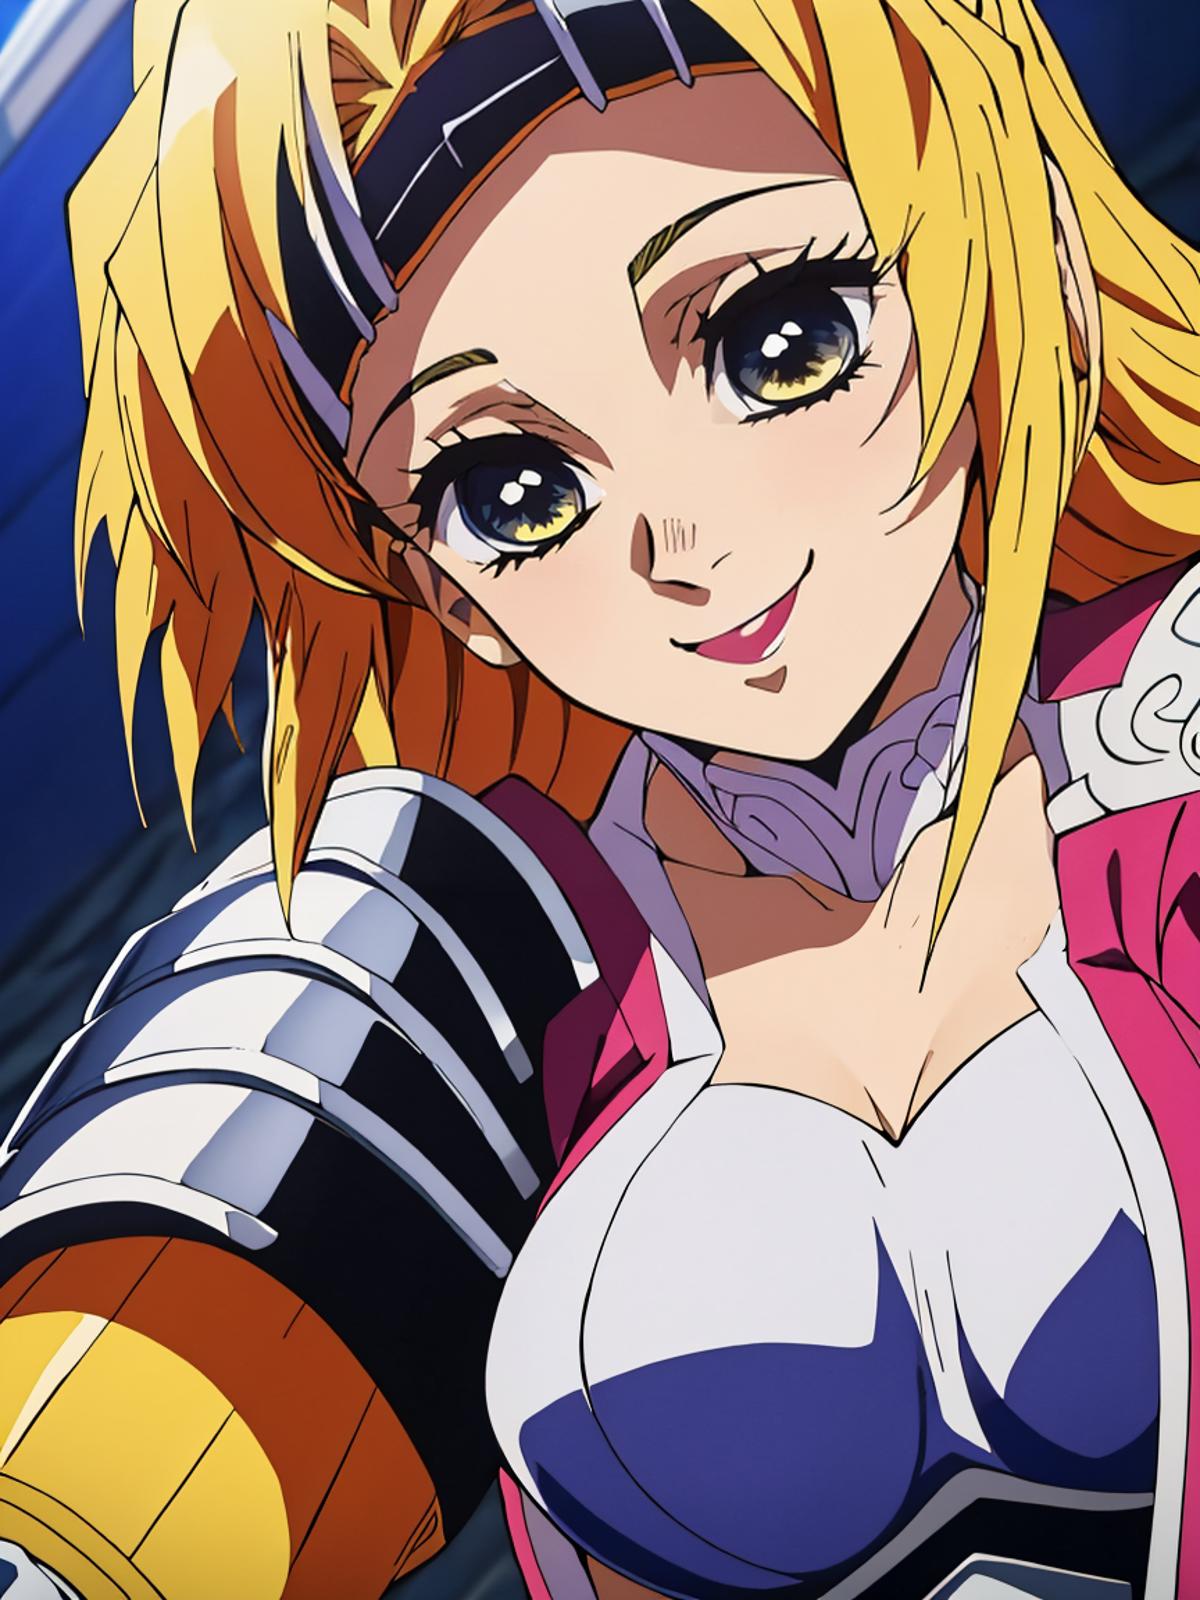 Anime Cartoon Woman in Pink Jacket with Yellow Hair and Blue Eyes.